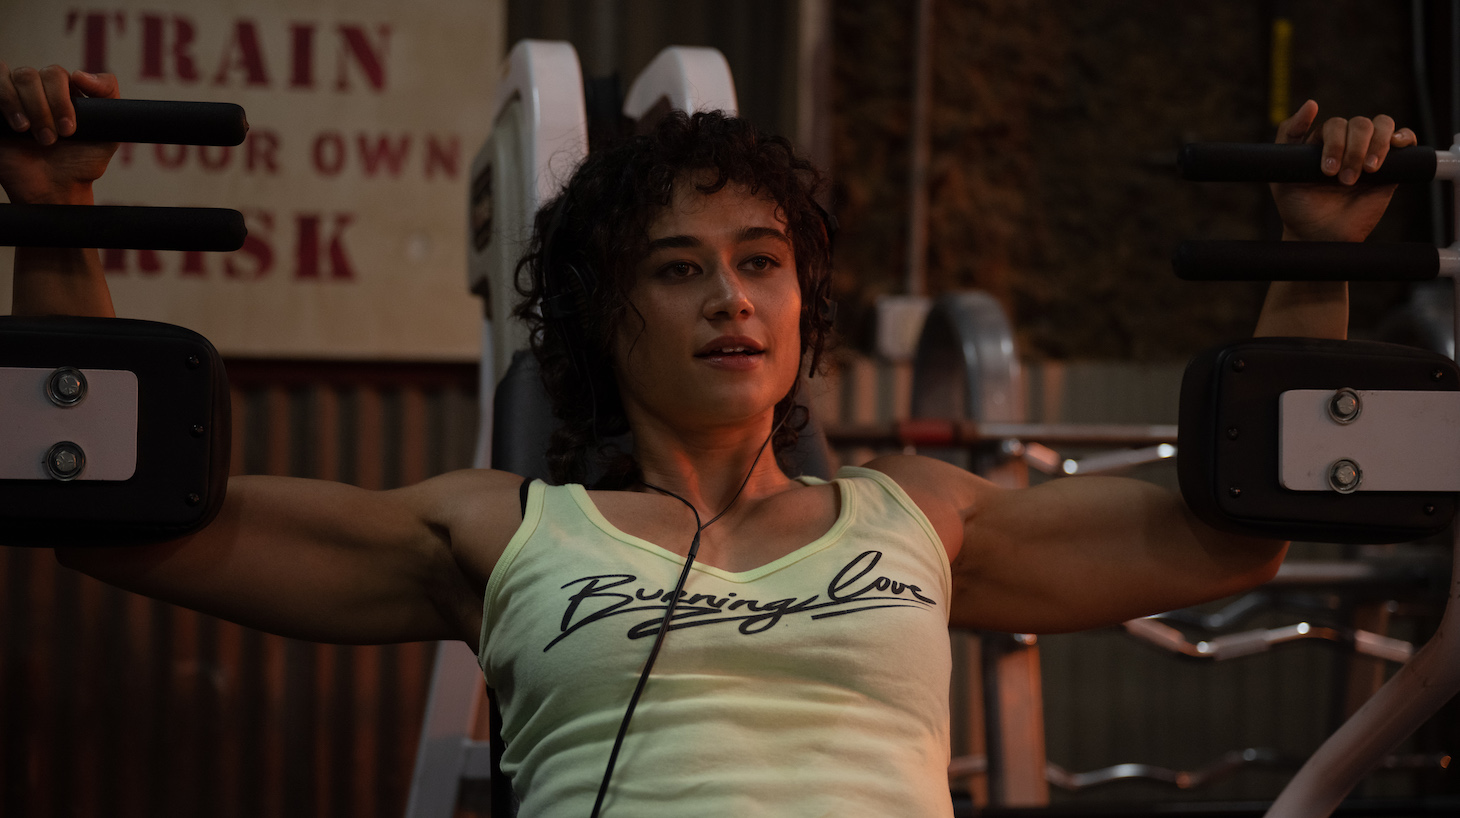 Still image of actress Katy O'Brian using gym equipment, taken from the movie Love Lies Bleeding.